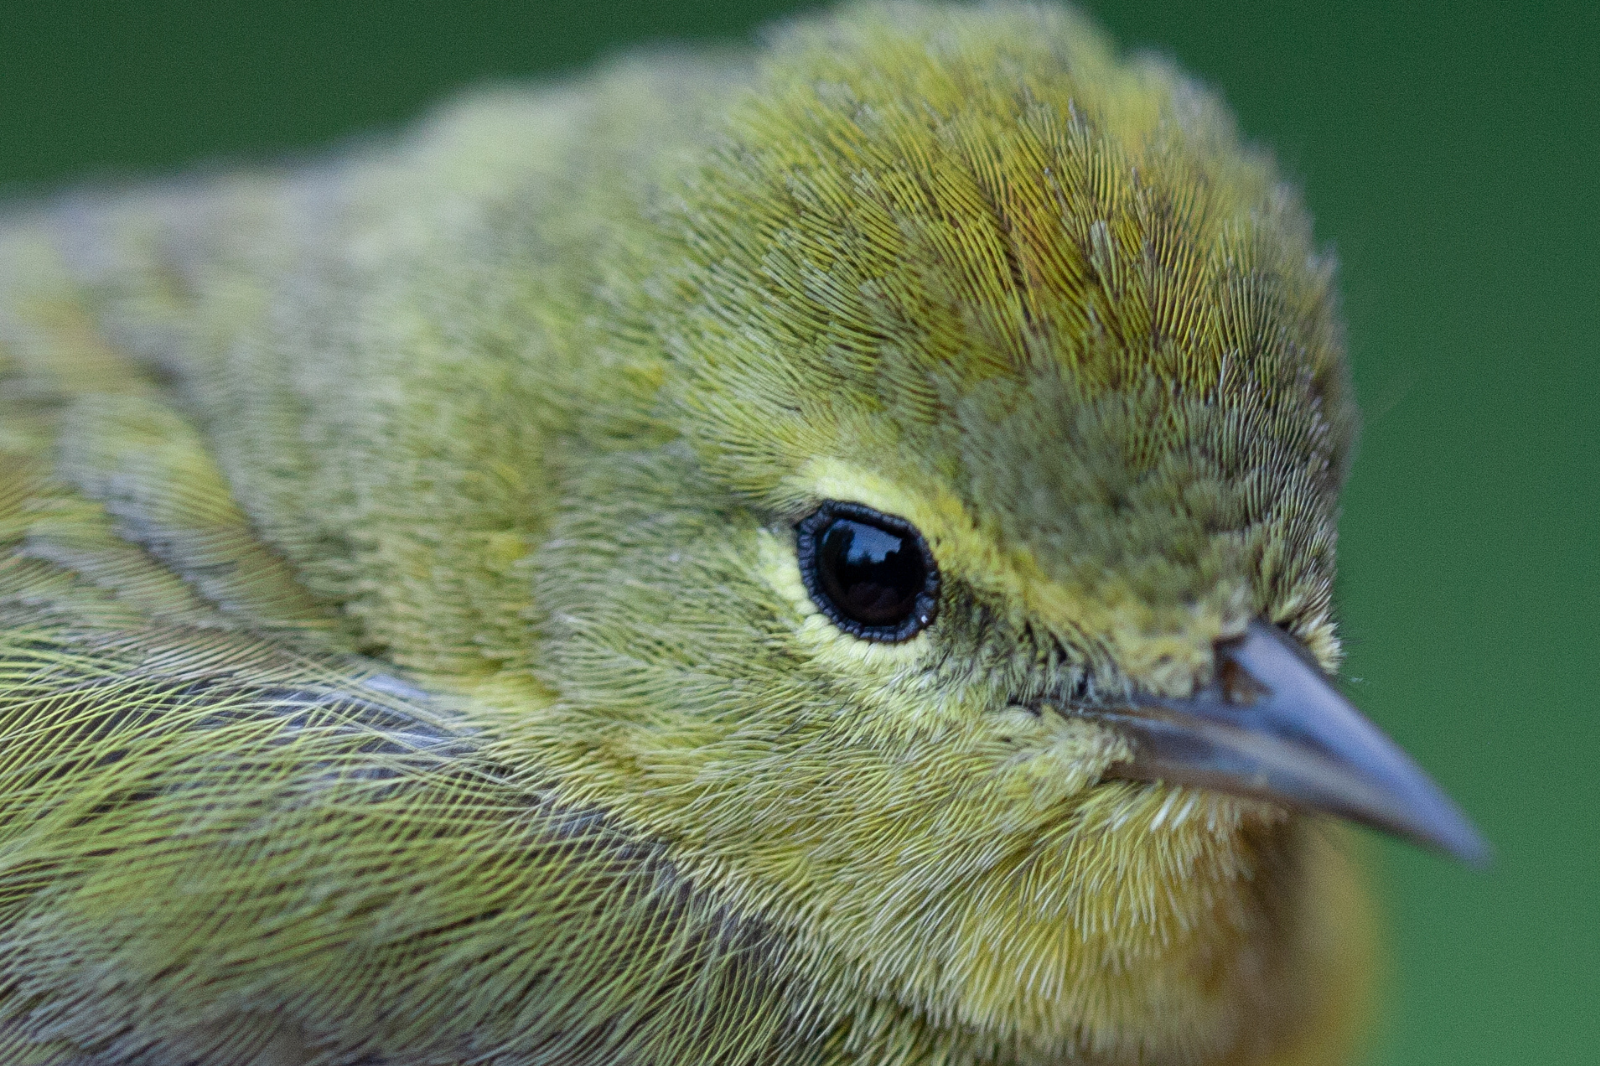 Orange-crowned Warbler (Leiothlypis celata), one of the most common warblers that uses Iona Island as a migration stopover site in southwestern British Columbia every year. Photo credit: Brendan Toews.